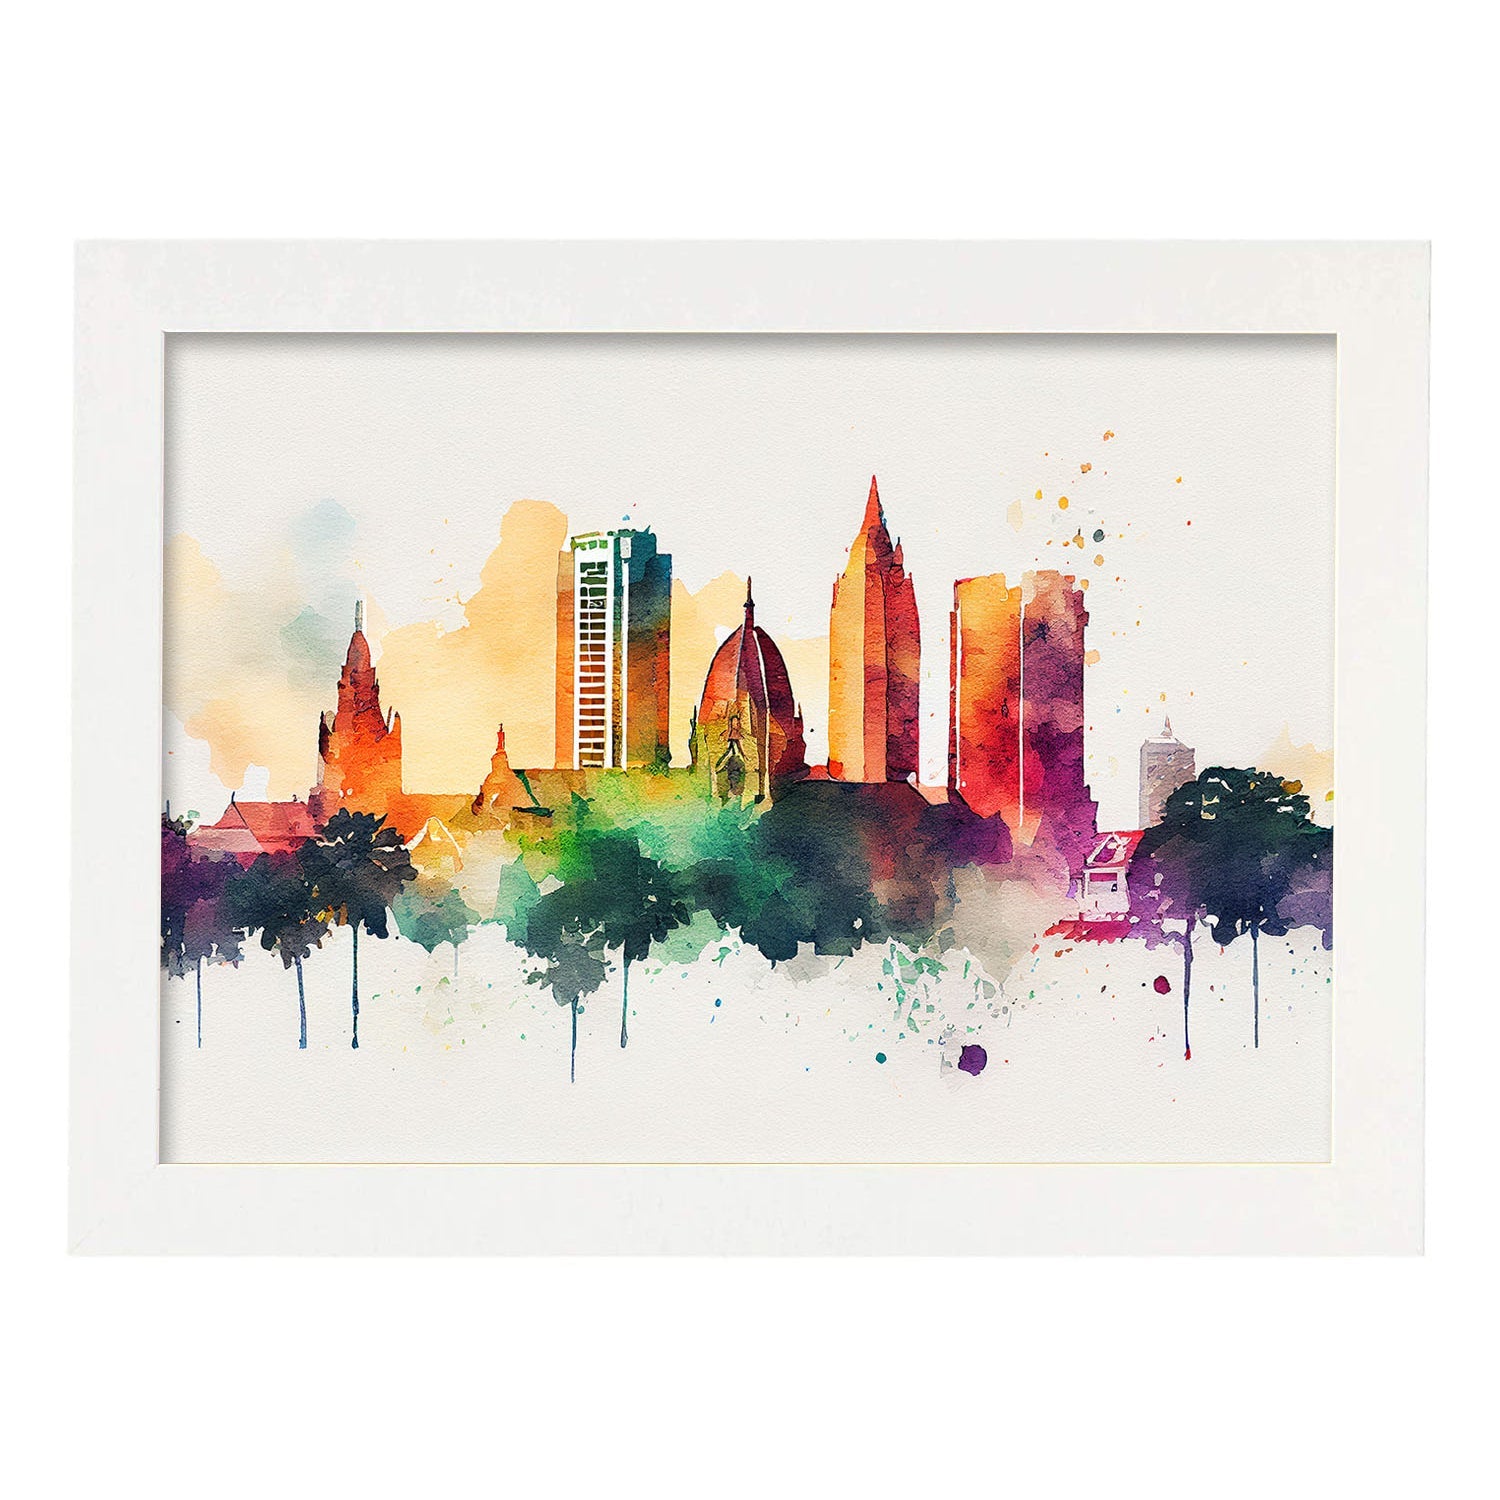 Nacnic watercolor of a skyline of the city of Colombo. Aesthetic Wall Art Prints for Bedroom or Living Room Design.-Artwork-Nacnic-A4-Marco Blanco-Nacnic Estudio SL